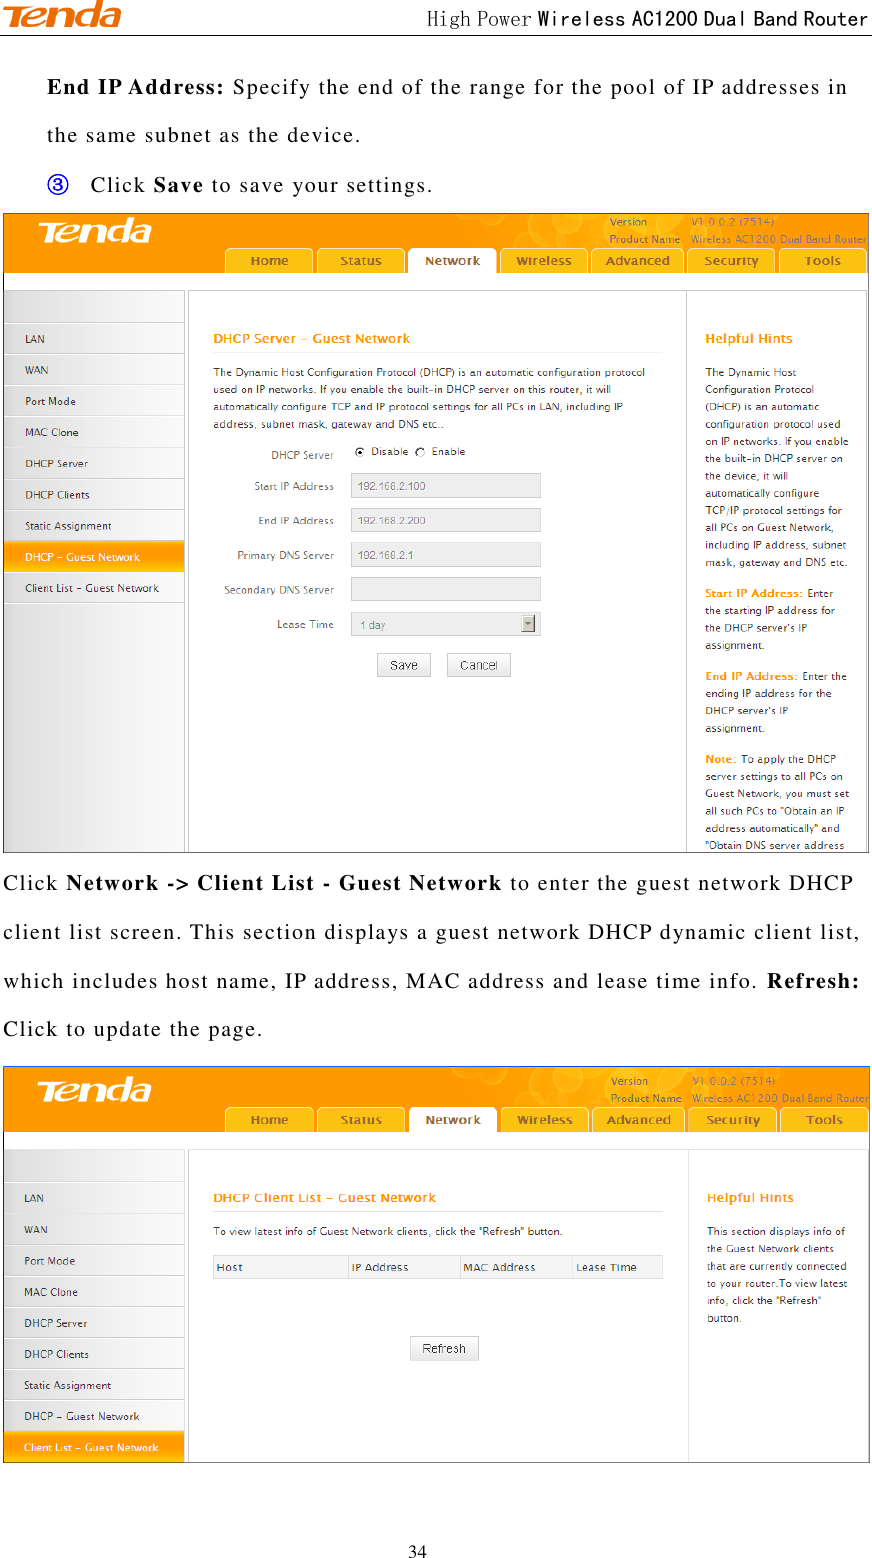                                             High Power Wireless AC1200 Dual Band Router 34 End IP Address: Specify the end of the range for the pool of IP addresses in the same subnet as the device. ③ Click Save to save your settings.  Click Network -&gt; Client List - Guest Network to enter the guest network DHCP client list screen. This section displays a guest network DHCP dynamic client list, which includes host name, IP address, MAC address and lease time info. Refresh: Click to update the page.  